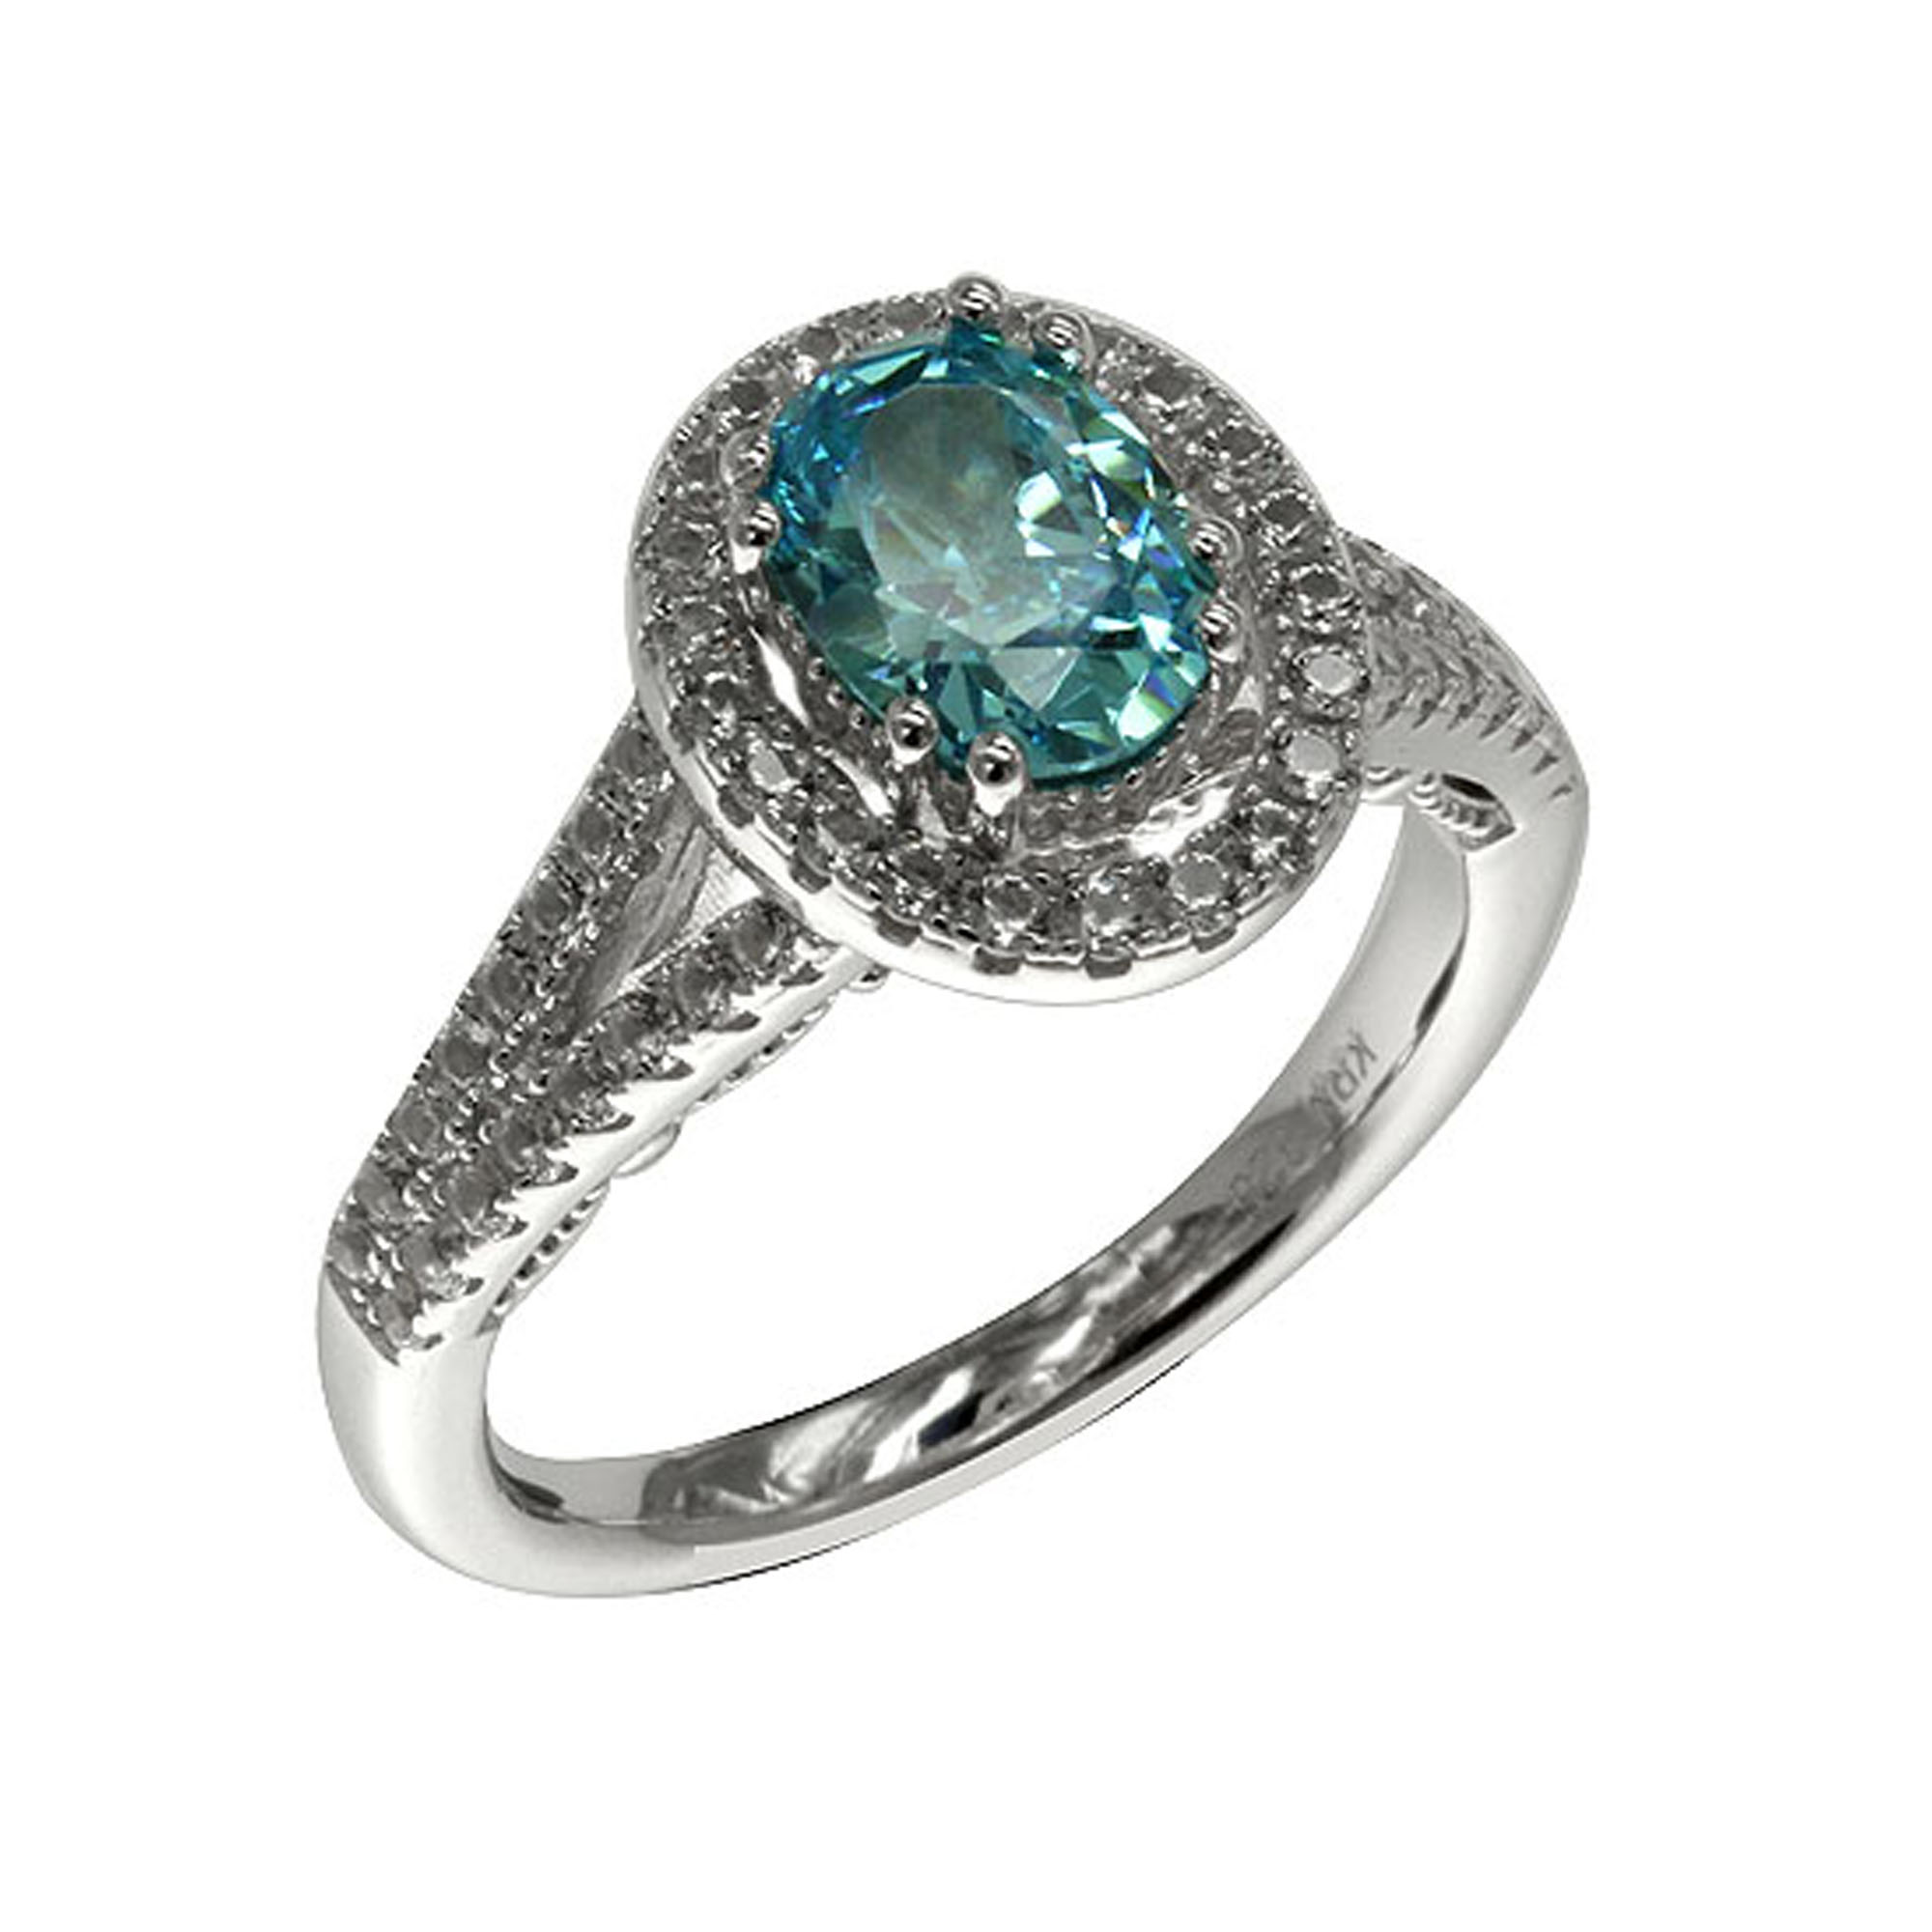 Center Created Aqua & Side Created White Sapphire Ring in Sterling Silver